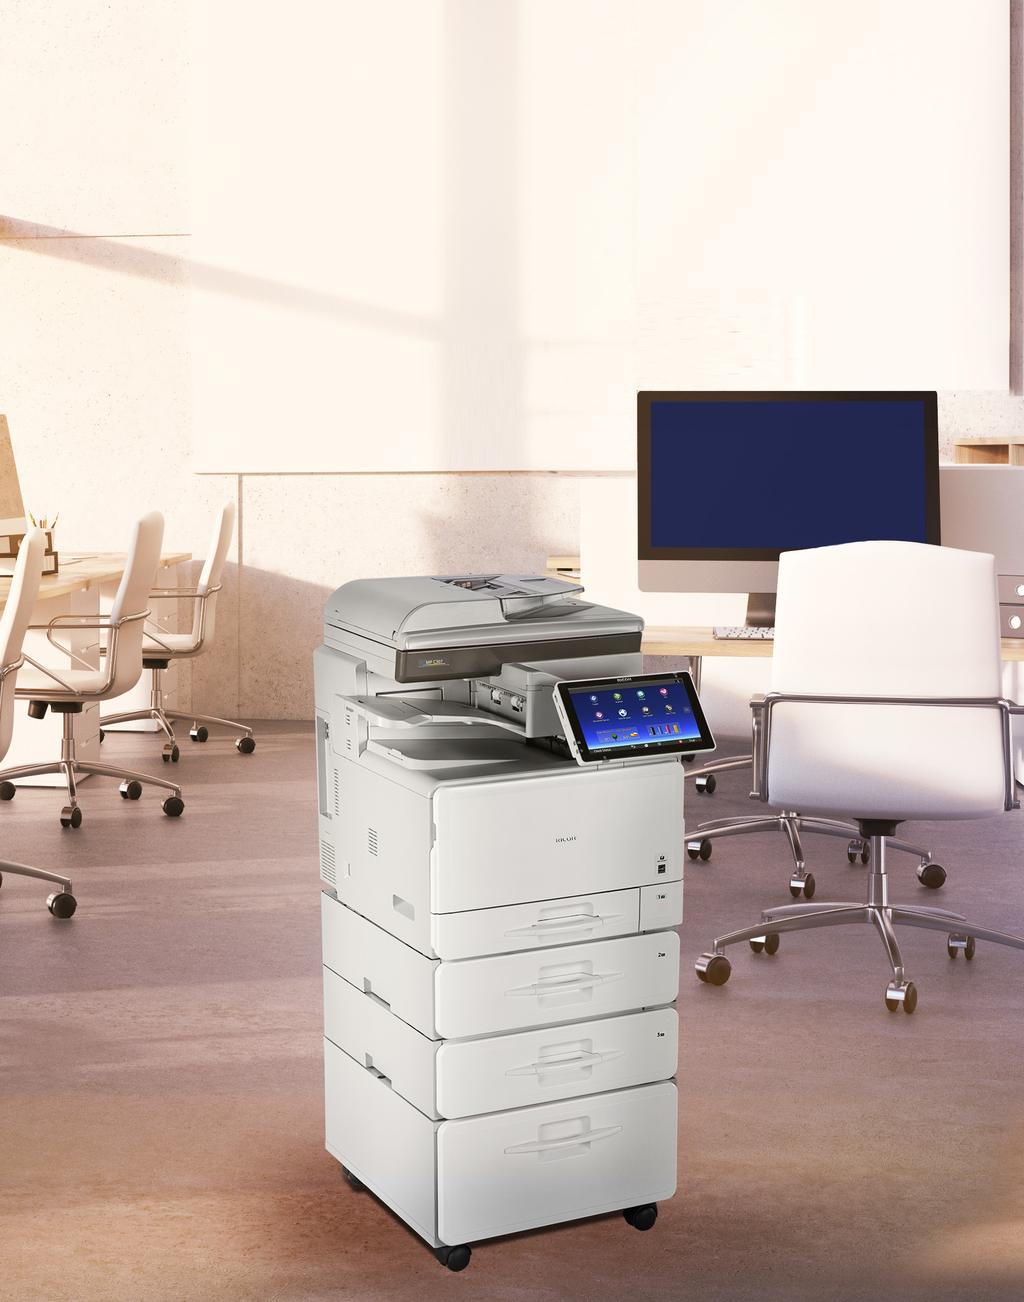 Turn limited space into an advantage Improve your workgroup s productivity and economics by keeping more jobs in-house with the RICOH MP C307/MP C407 color laser multifunction printers (MFPs).